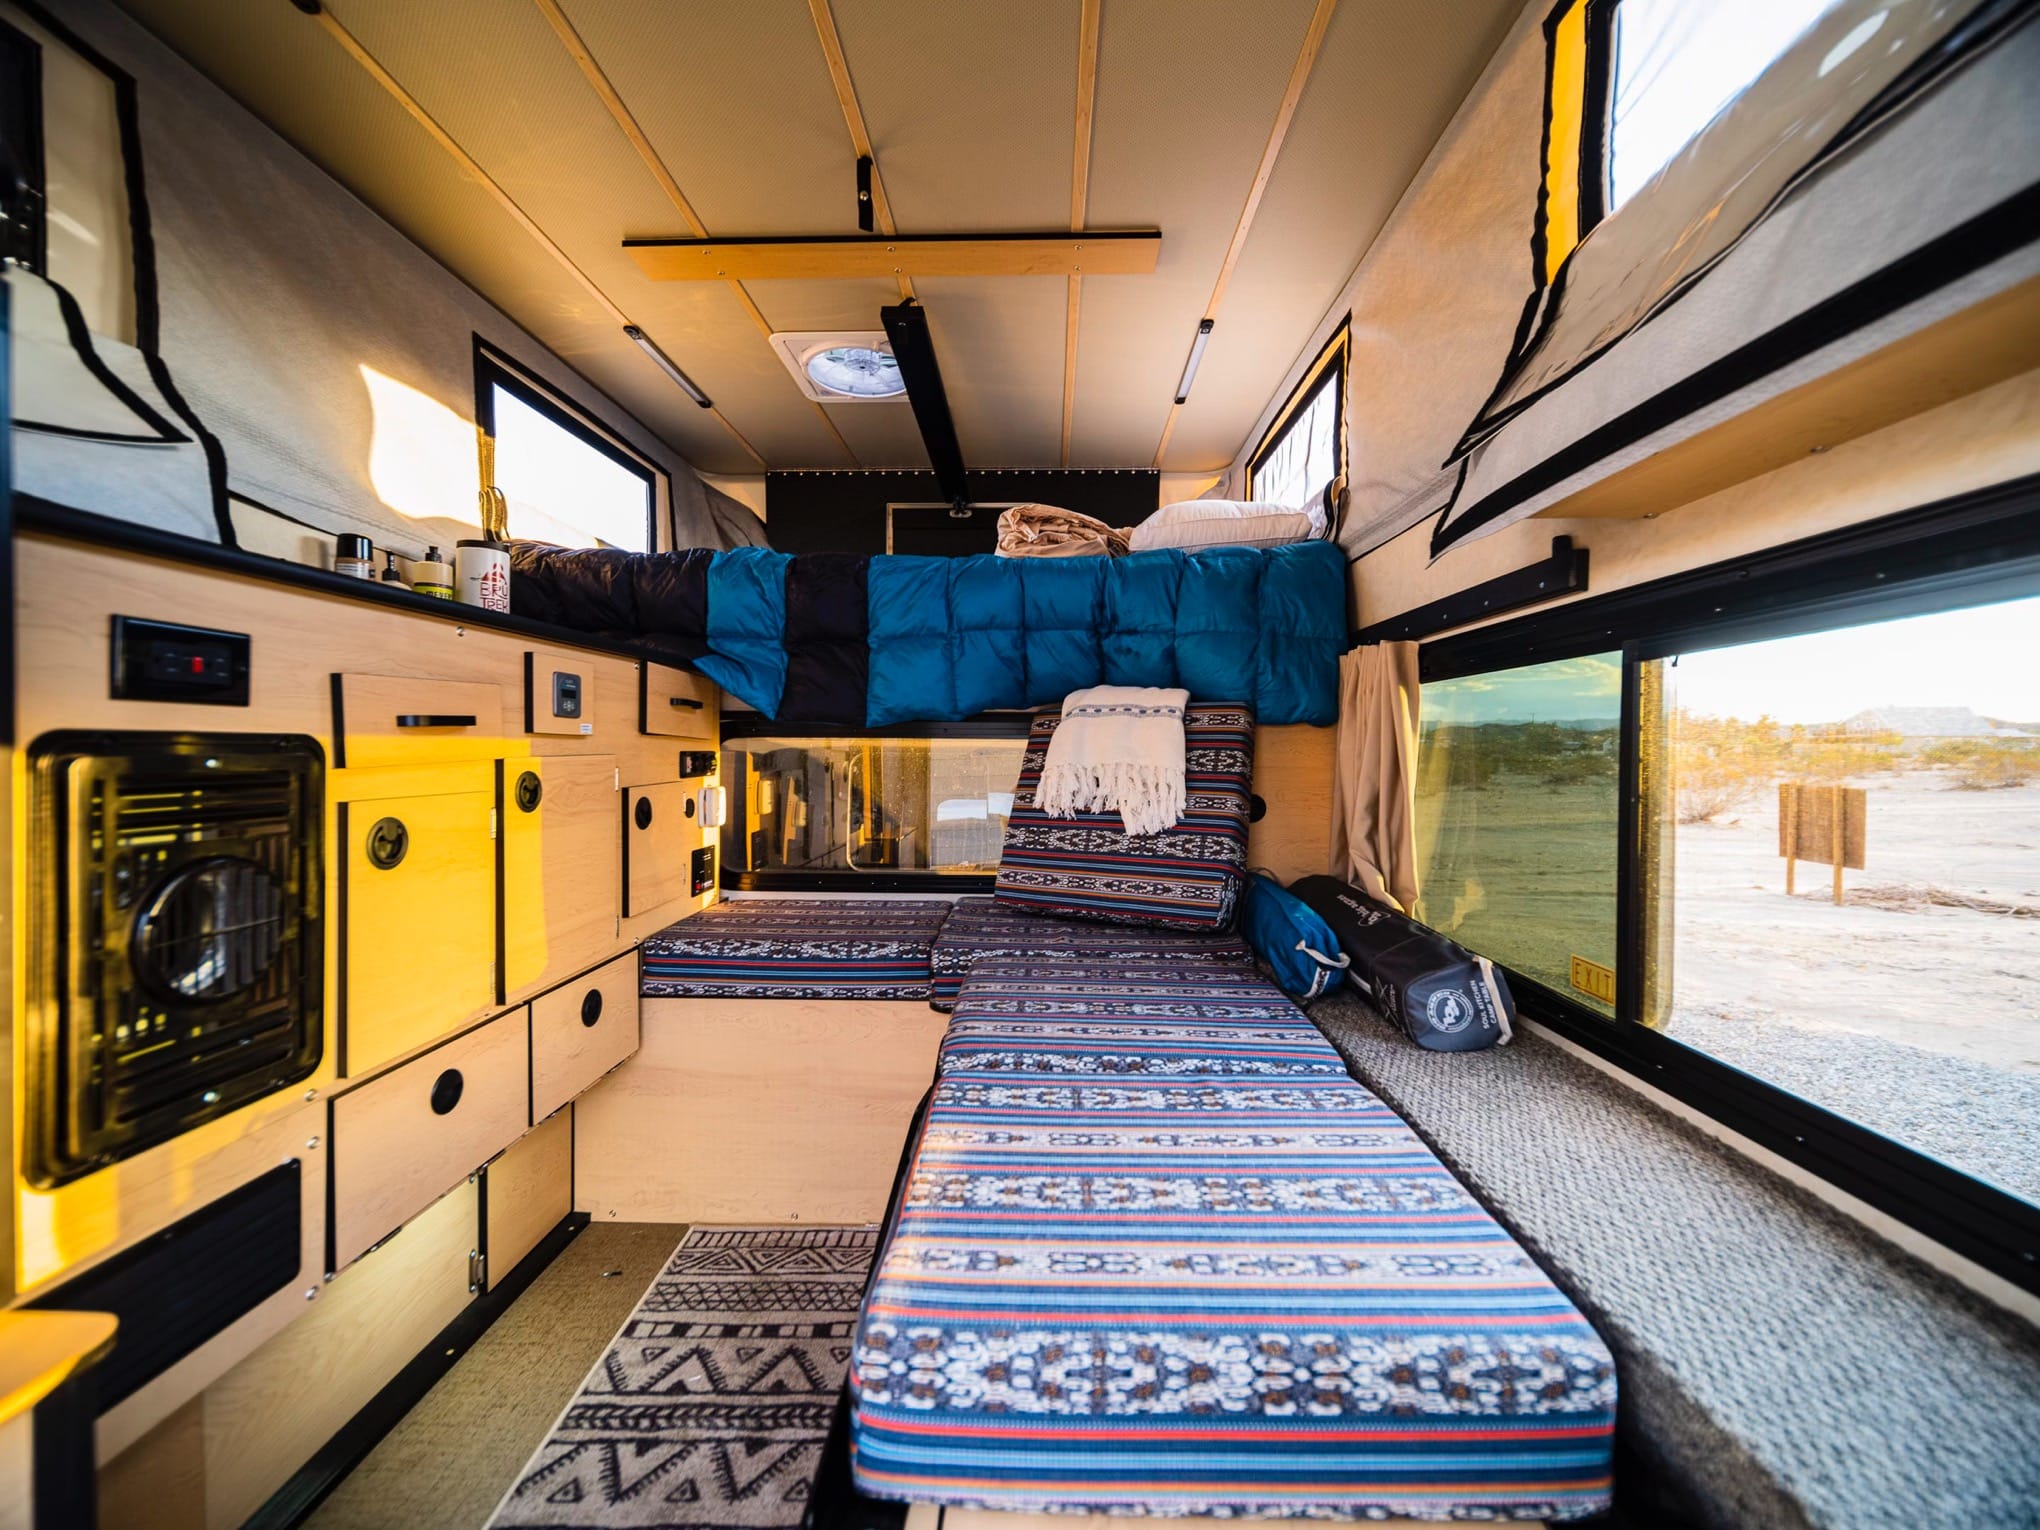 The Interior of Stuart Palley's Truck Camper